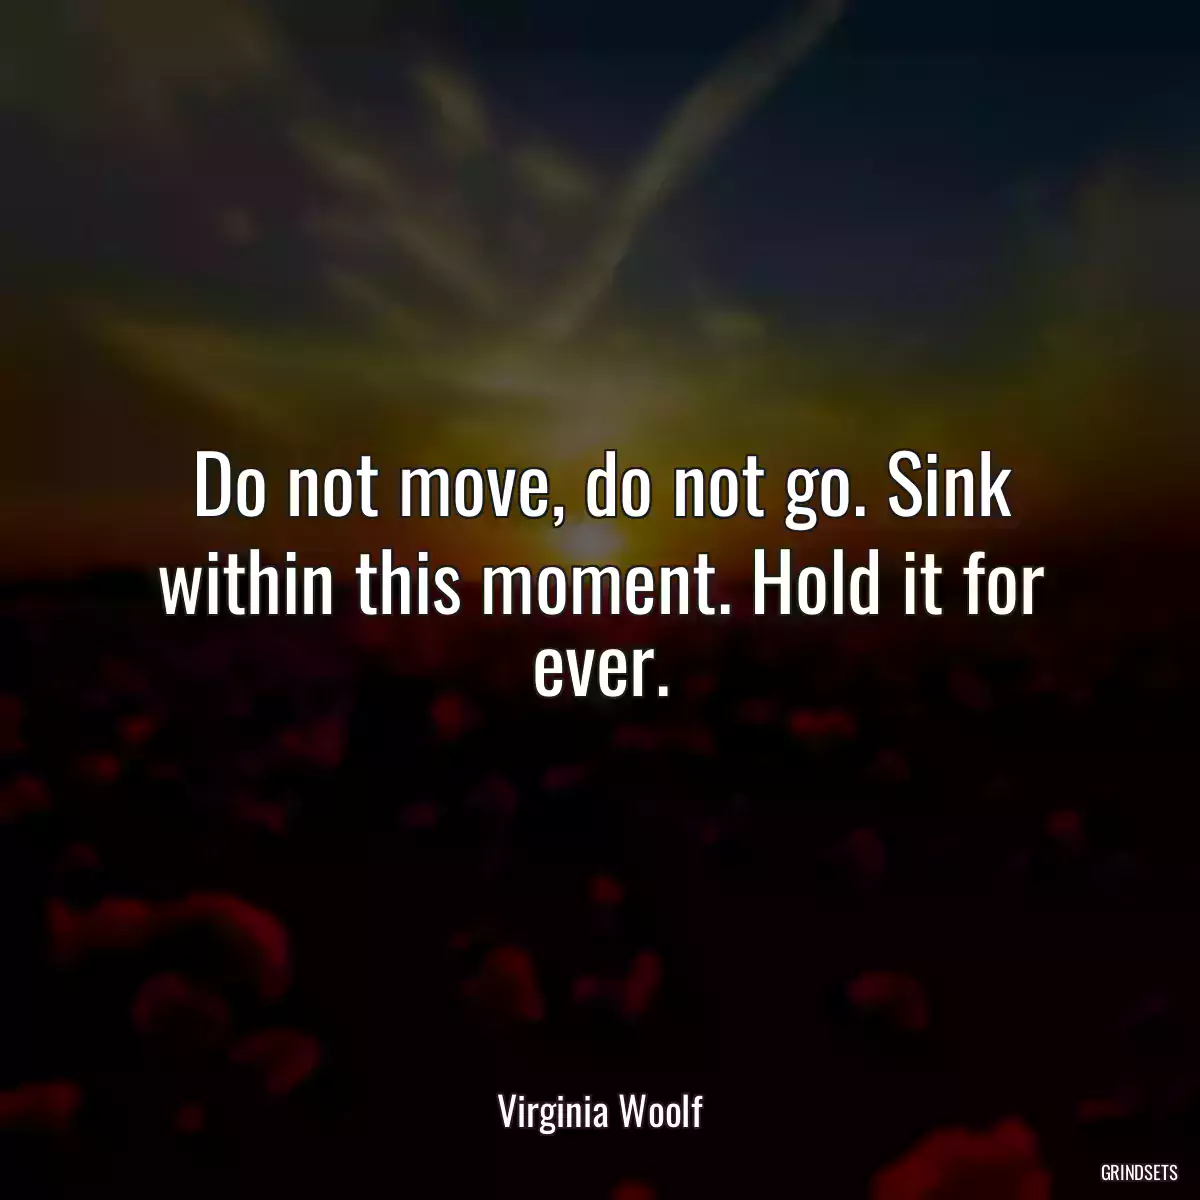 Do not move, do not go. Sink within this moment. Hold it for ever.